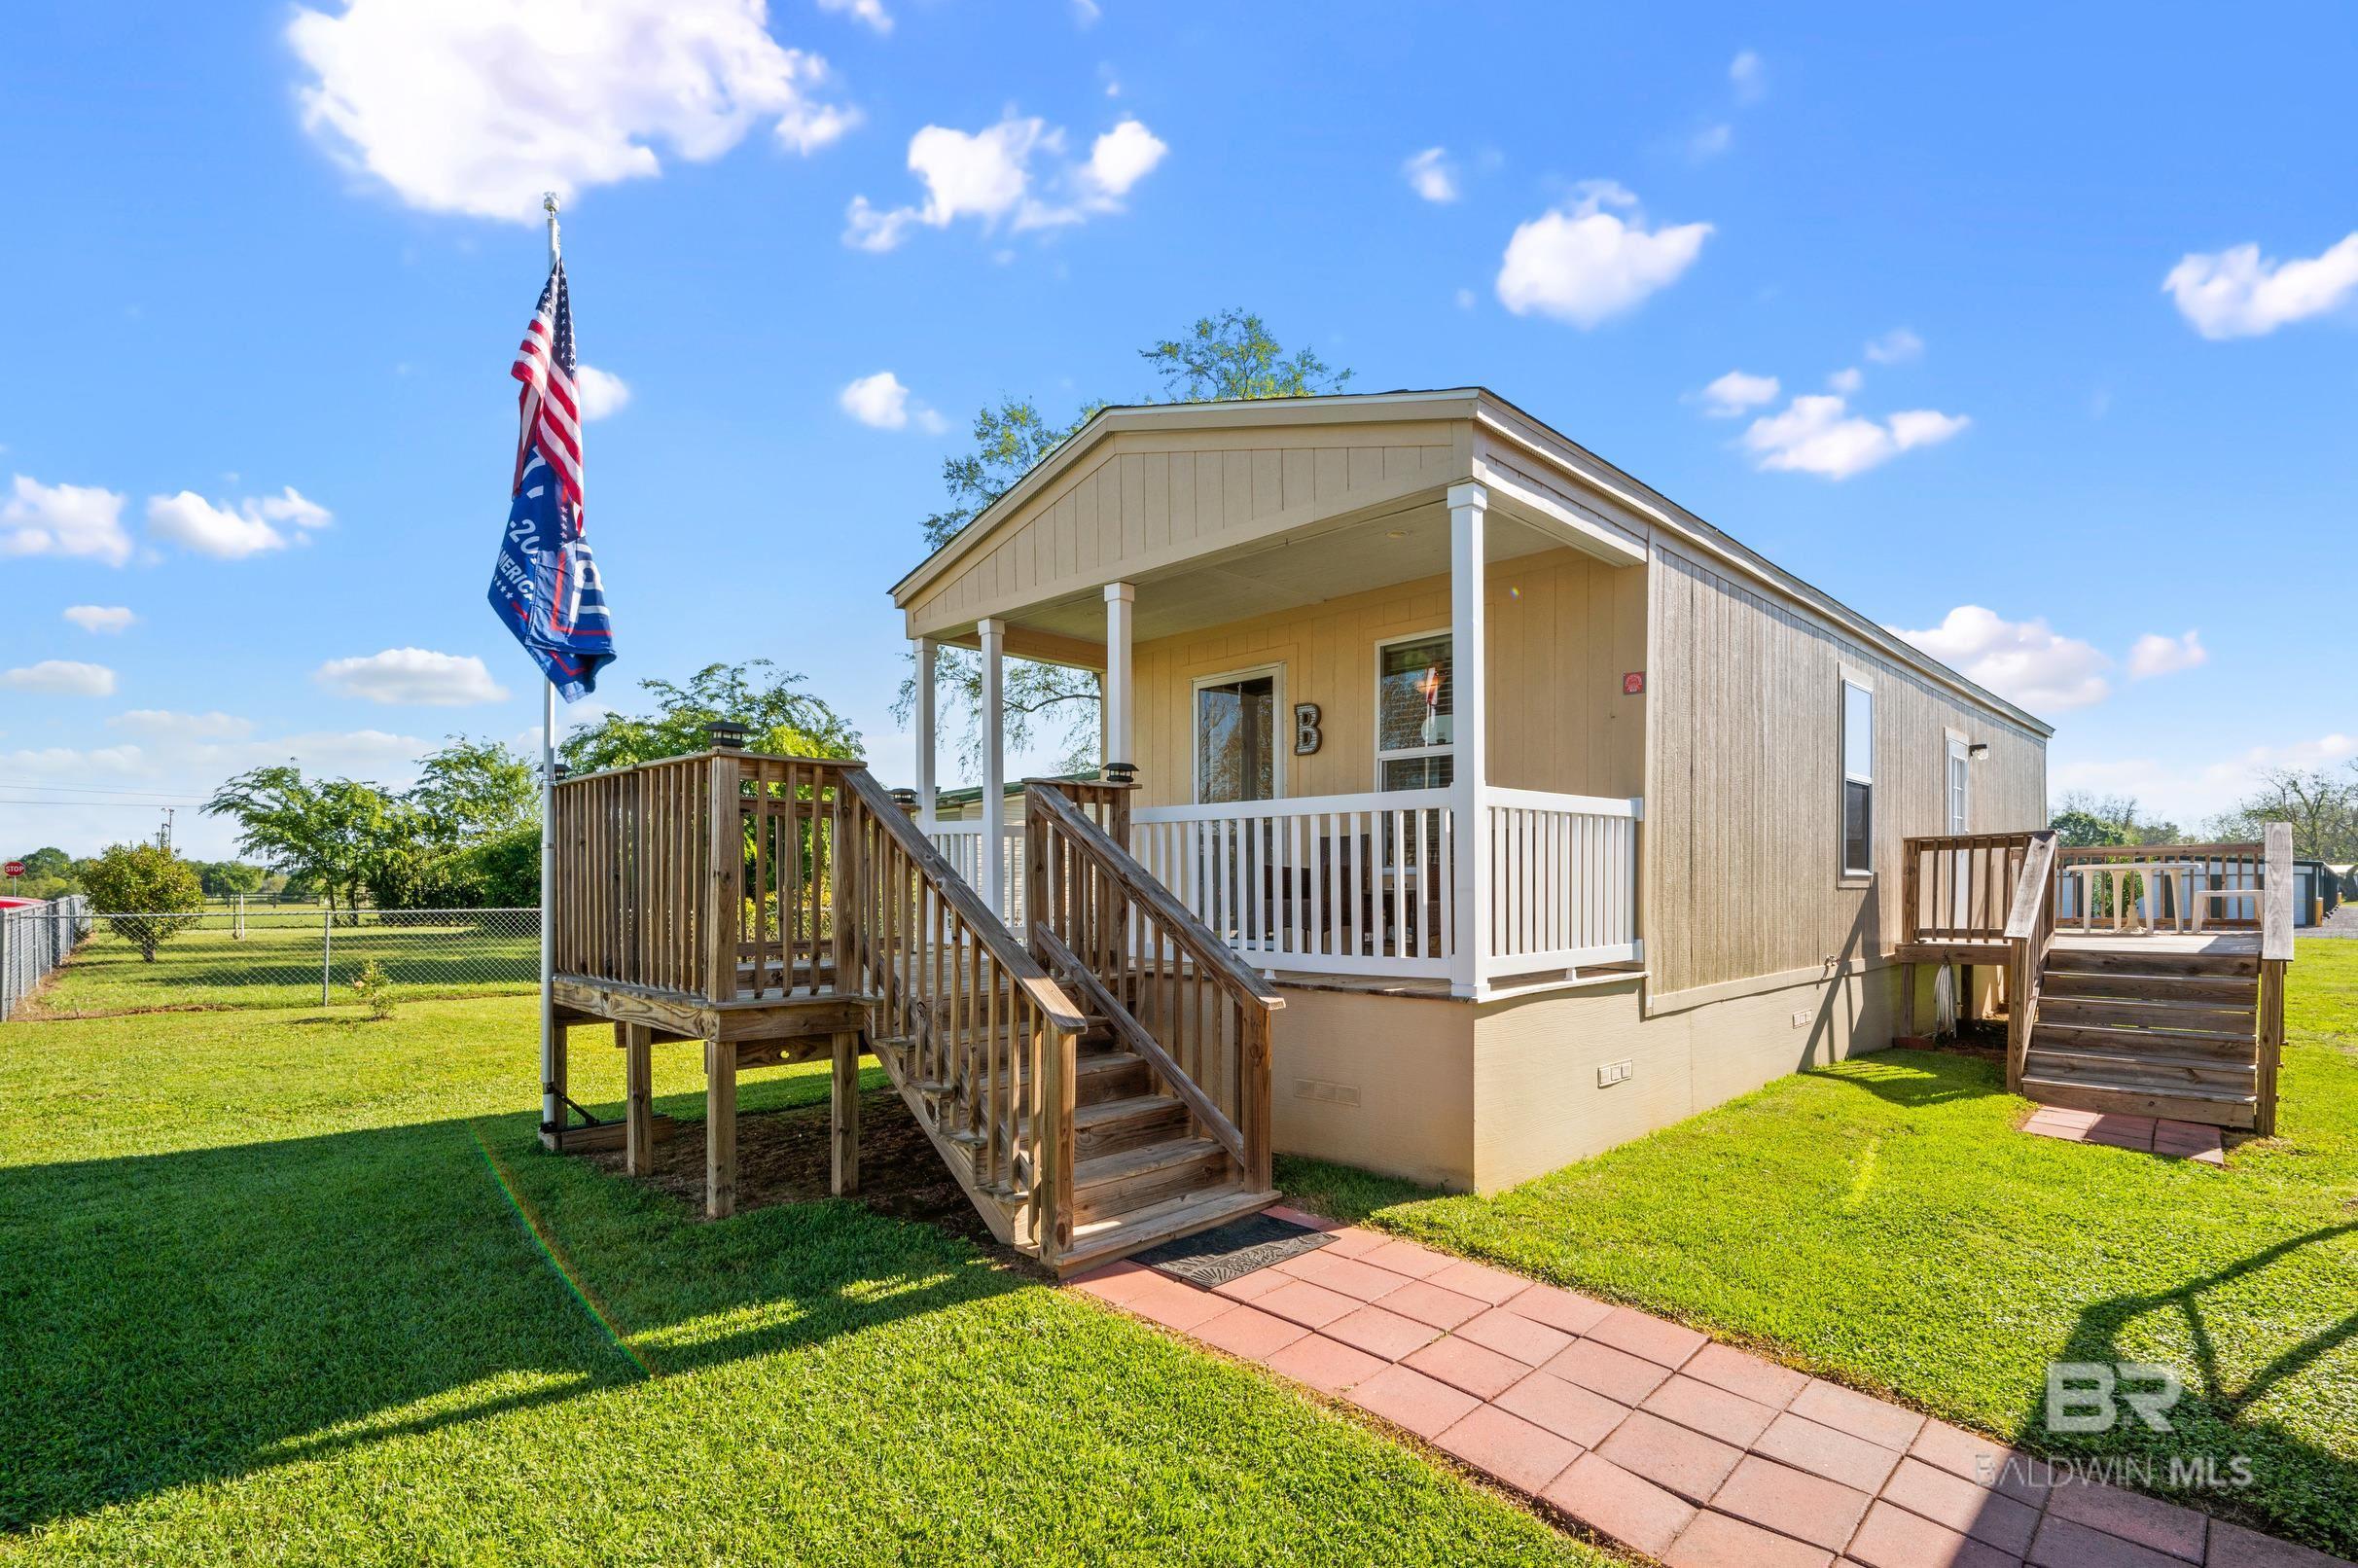 OPEN HOUSE: April 27, 2024 Time: 11am to 4pm!!! This Beauty is soo immaculate!! Turn Key!! Just bring your luggage and furniture!! Pulling up to it you'll notice the well maintained yard. It's a 2 Bedroom 1 Bath 16x50 mobile home with Hardie board siding and hardie board skirting!! Sits on .37 acres of land.  NO HOA!! Has 22x26 metal carport! 16x16 front porch deck, and it's extended by 8x8! The back deck is 8x16 large enough to have cookouts and more!!  Has 2 sheds on the back an 8x16 Barn style storage Shed and a 6x6 Shed!! Potential RV Set up on the lot. Minutes away from Point Clear!!